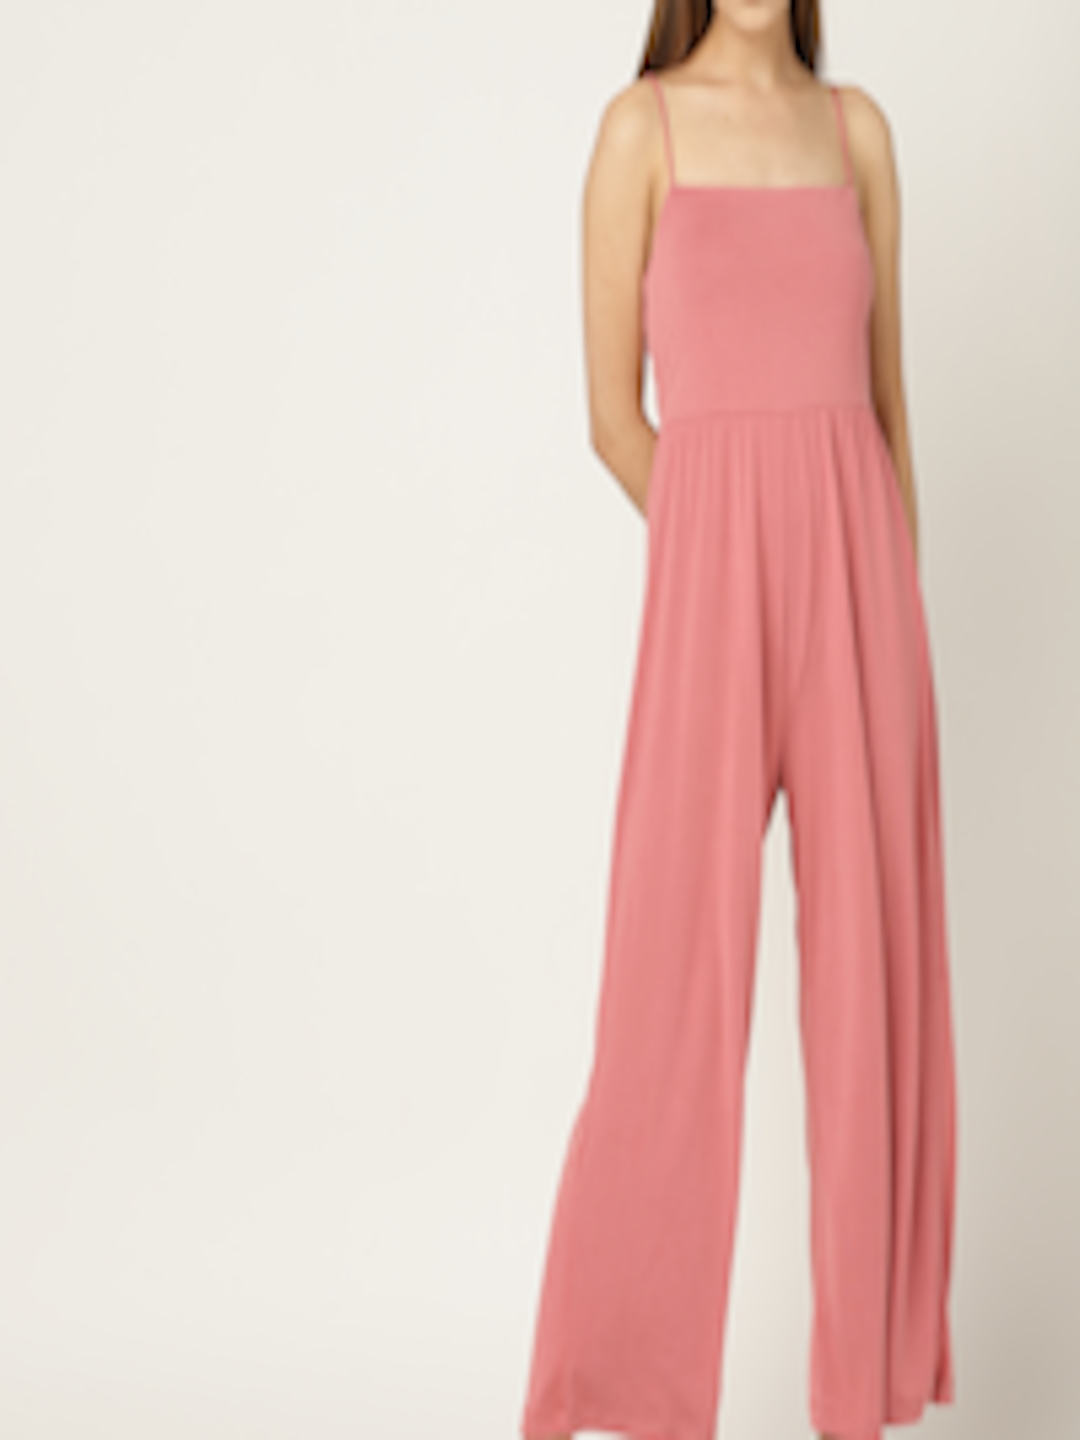 Buy MANGO Pink Solid Basic Jumpsuit - Jumpsuit for Women 9556543 | Myntra